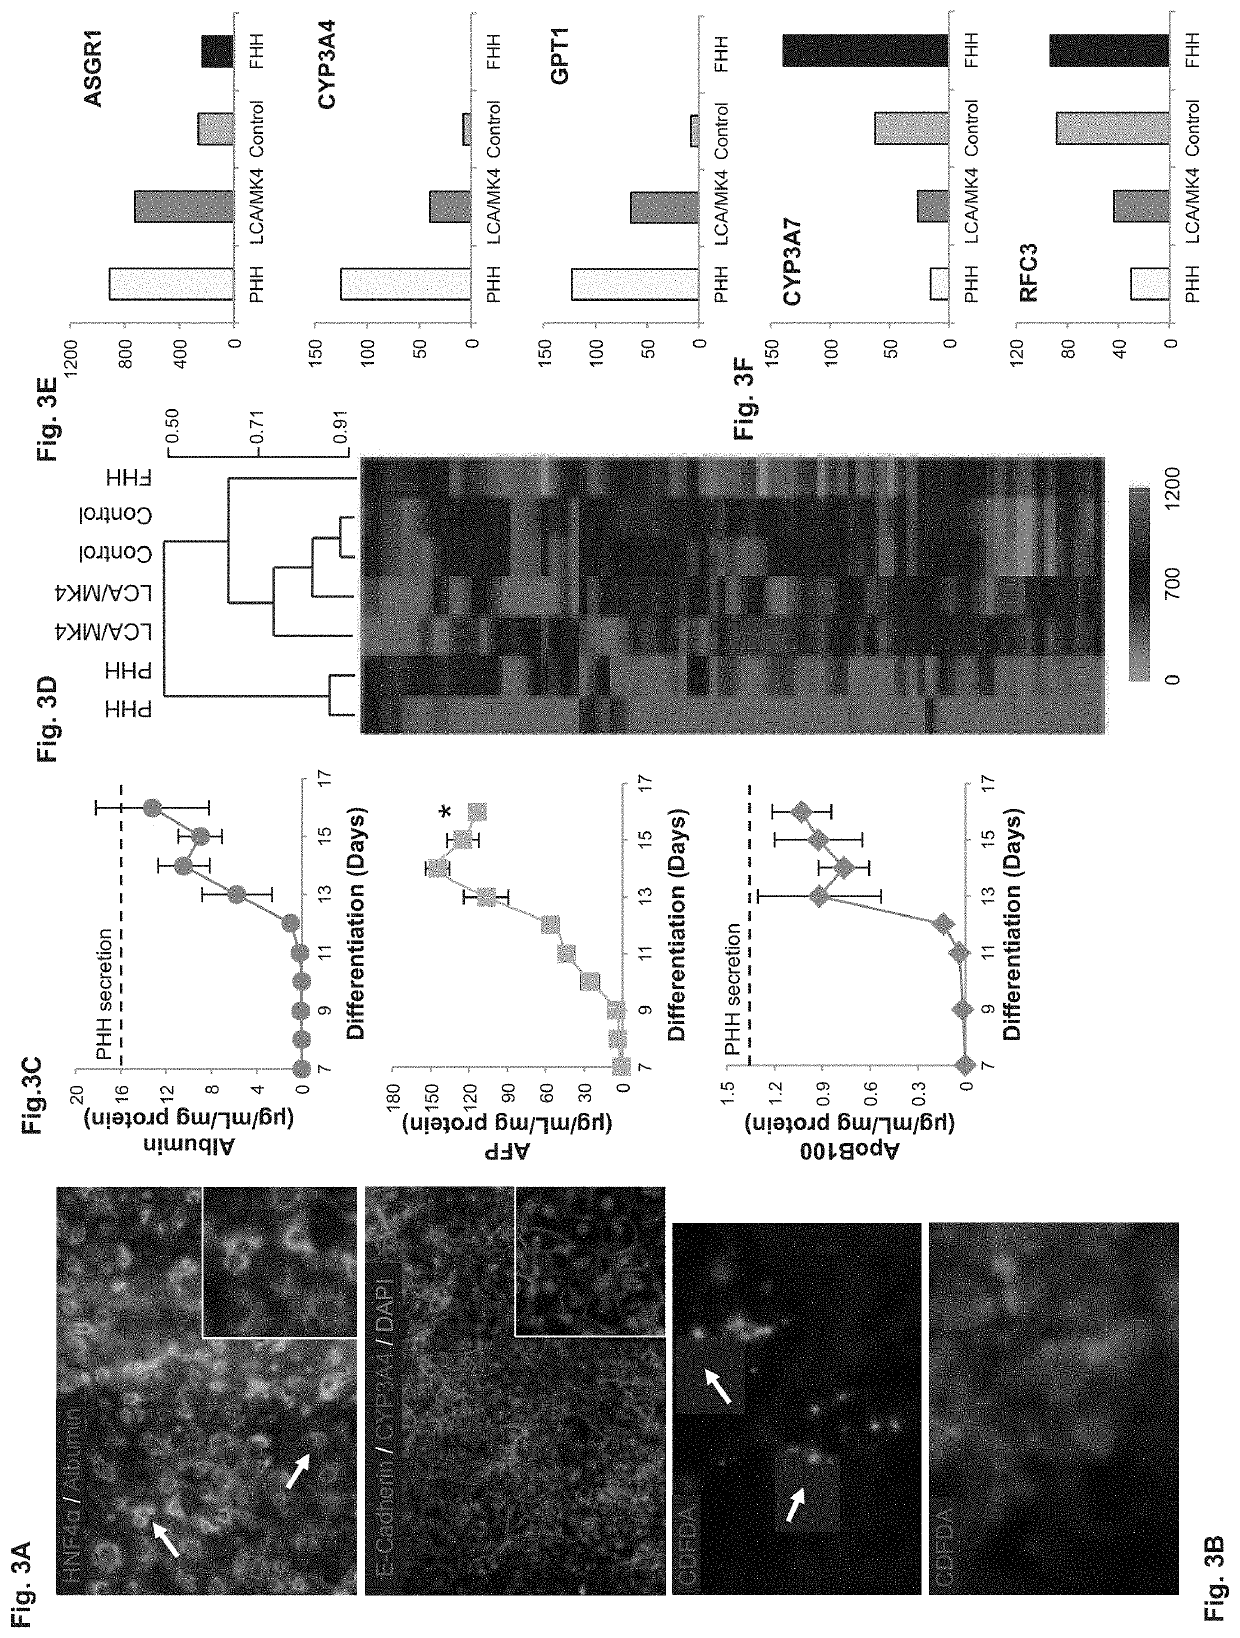 Methods of inducing metabolic maturation of human pluripotent stem cells— derived hepatocytes